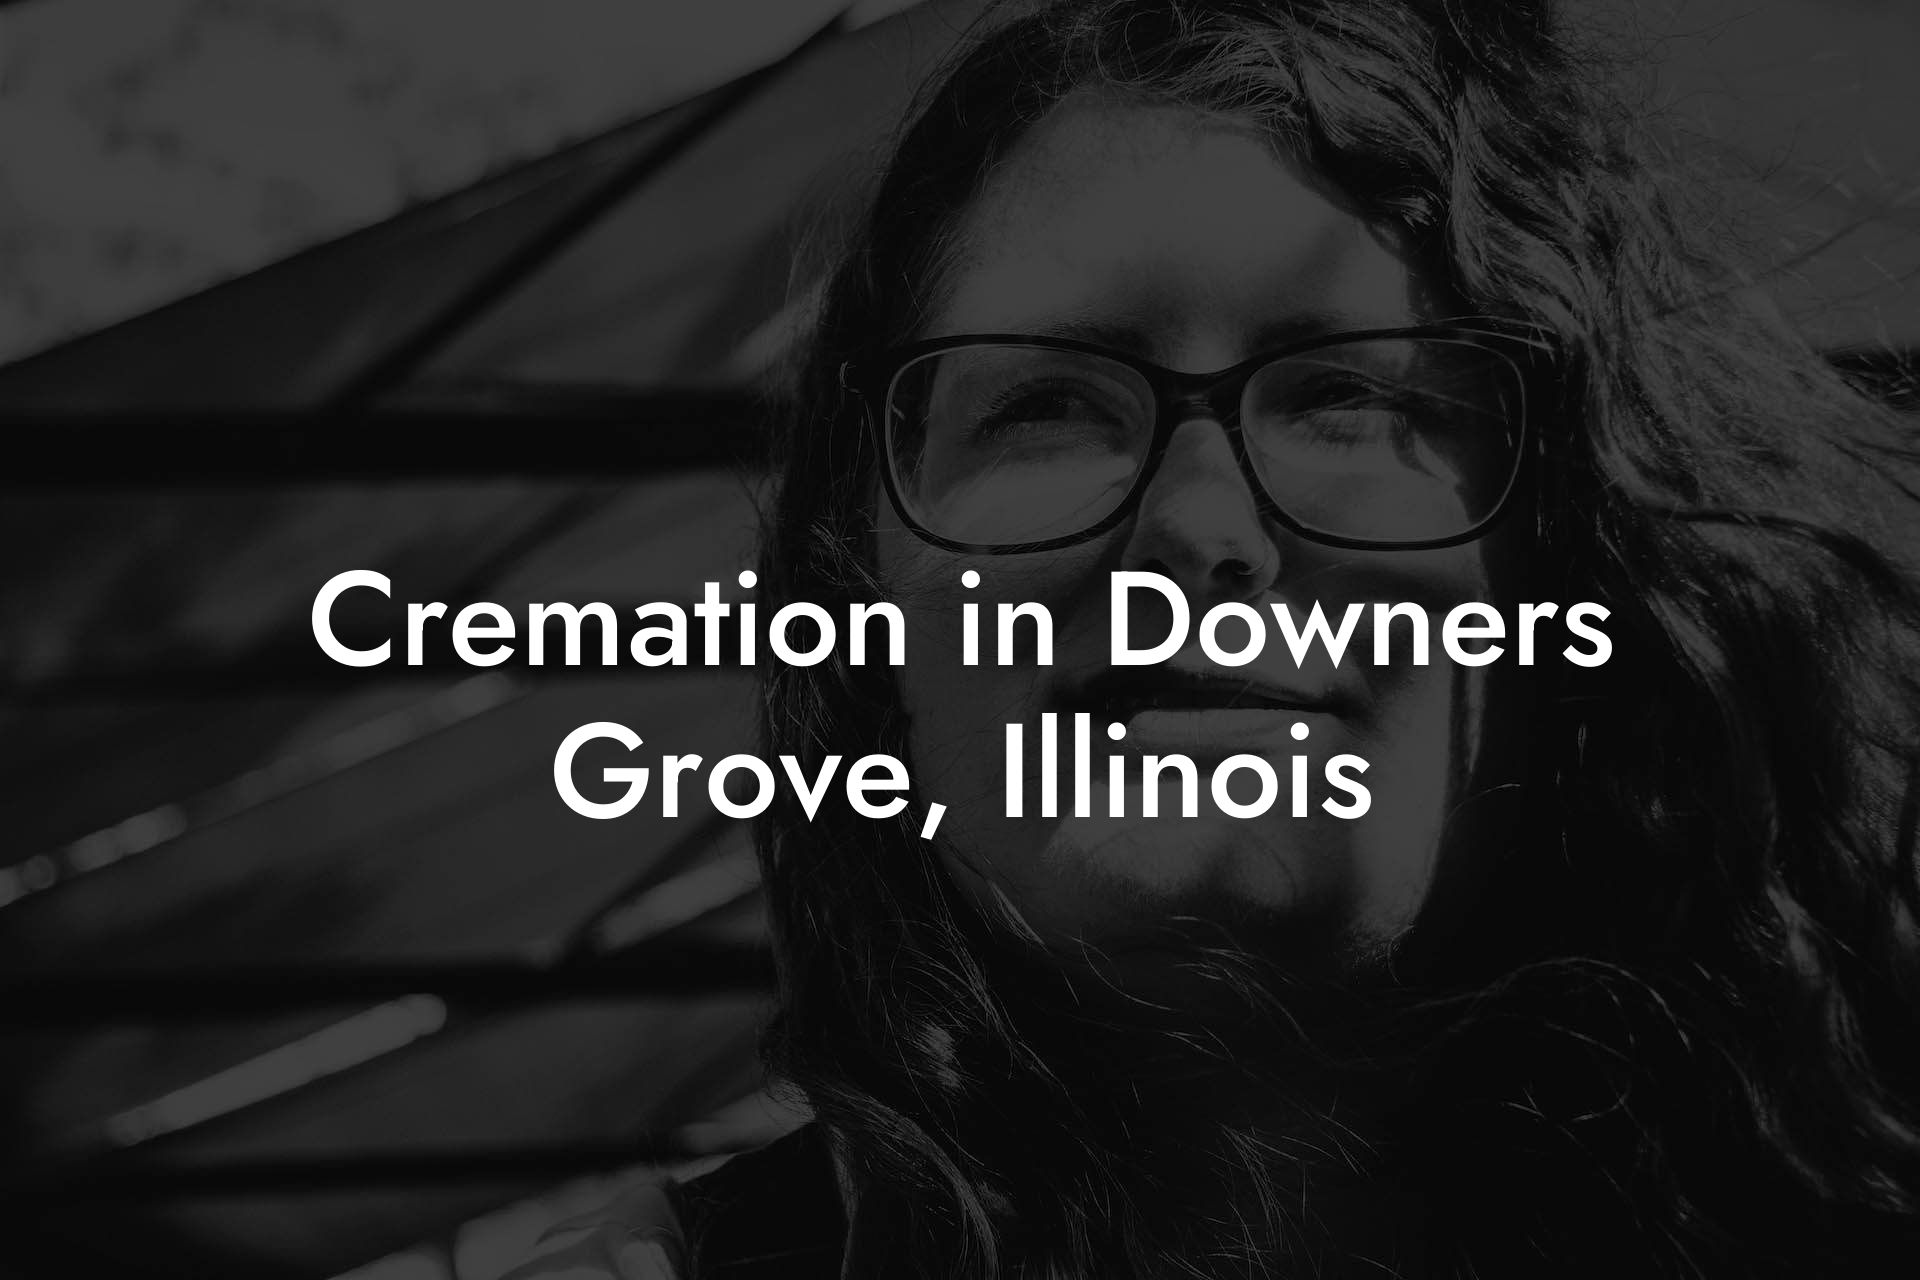 Cremation in Downers Grove, Illinois